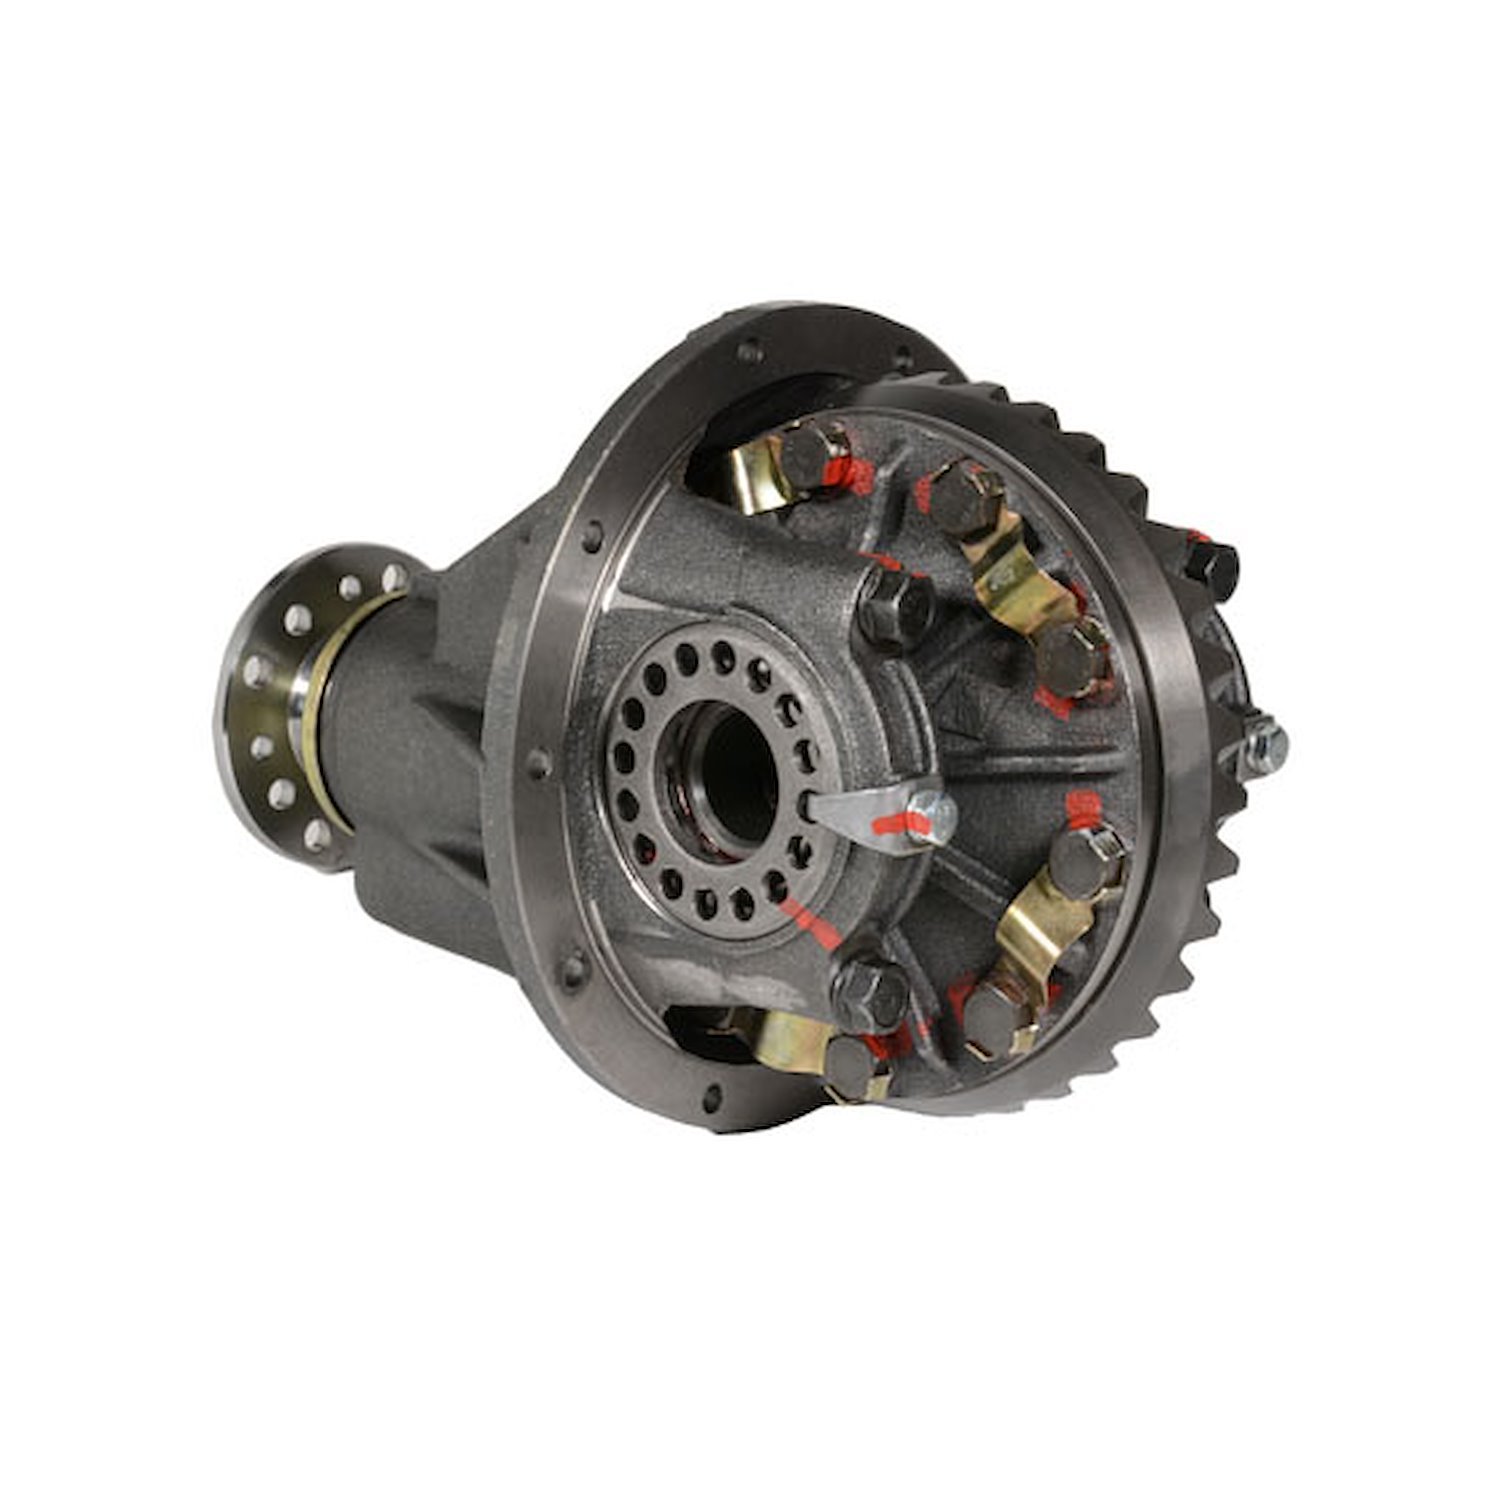 Dropout Assembly For Toyota 8 in. Rear Differential, 30 Spline, 4.11 Ratio